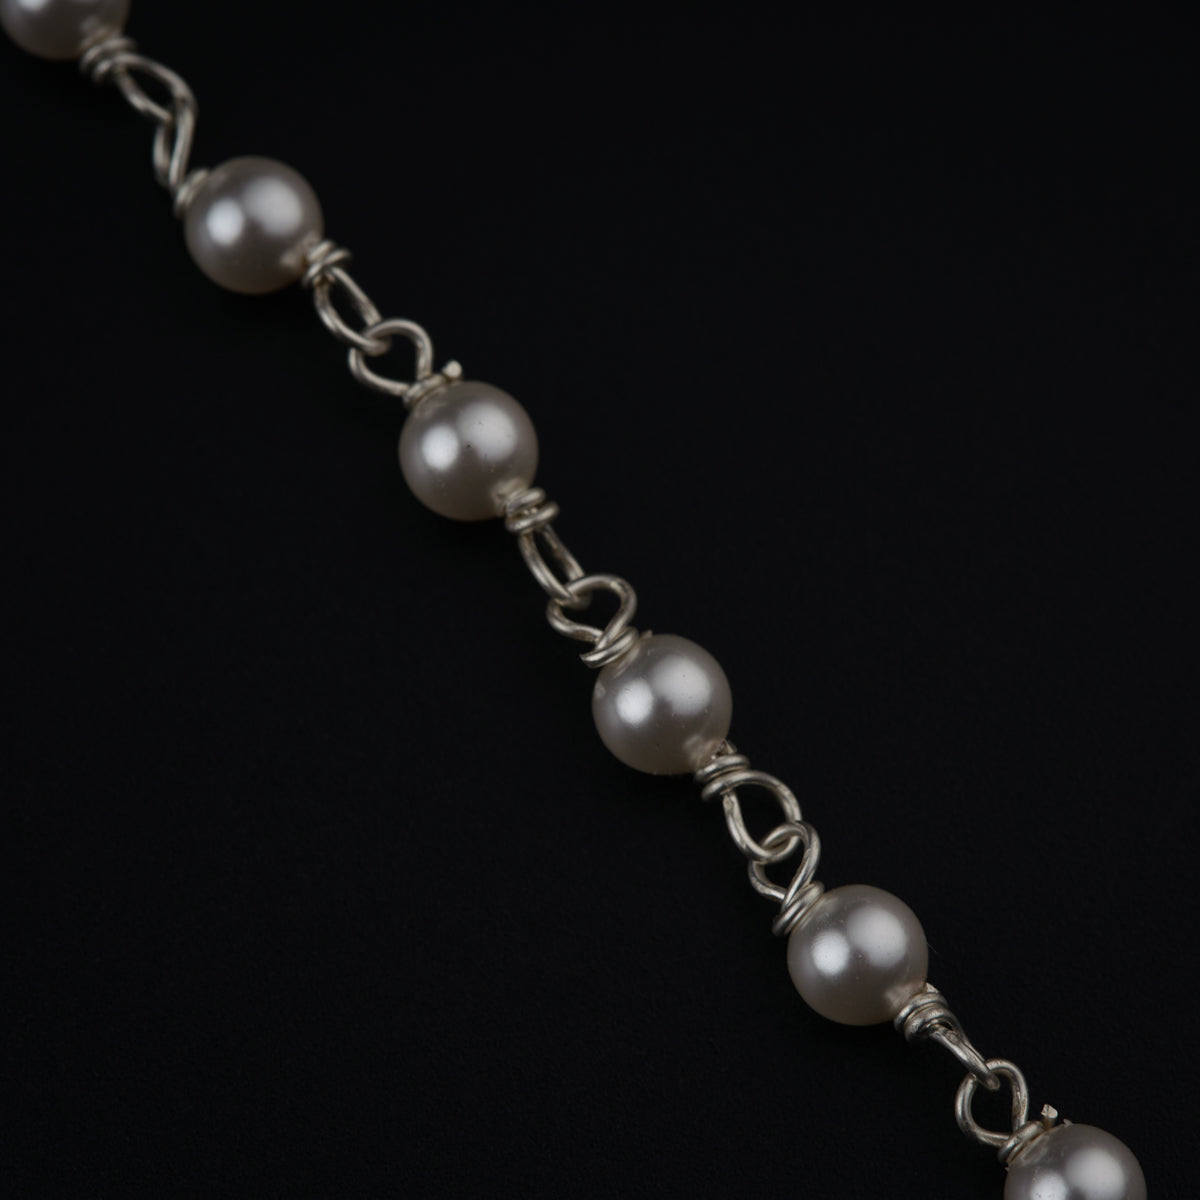 Antique Silver and Pearl Necklace